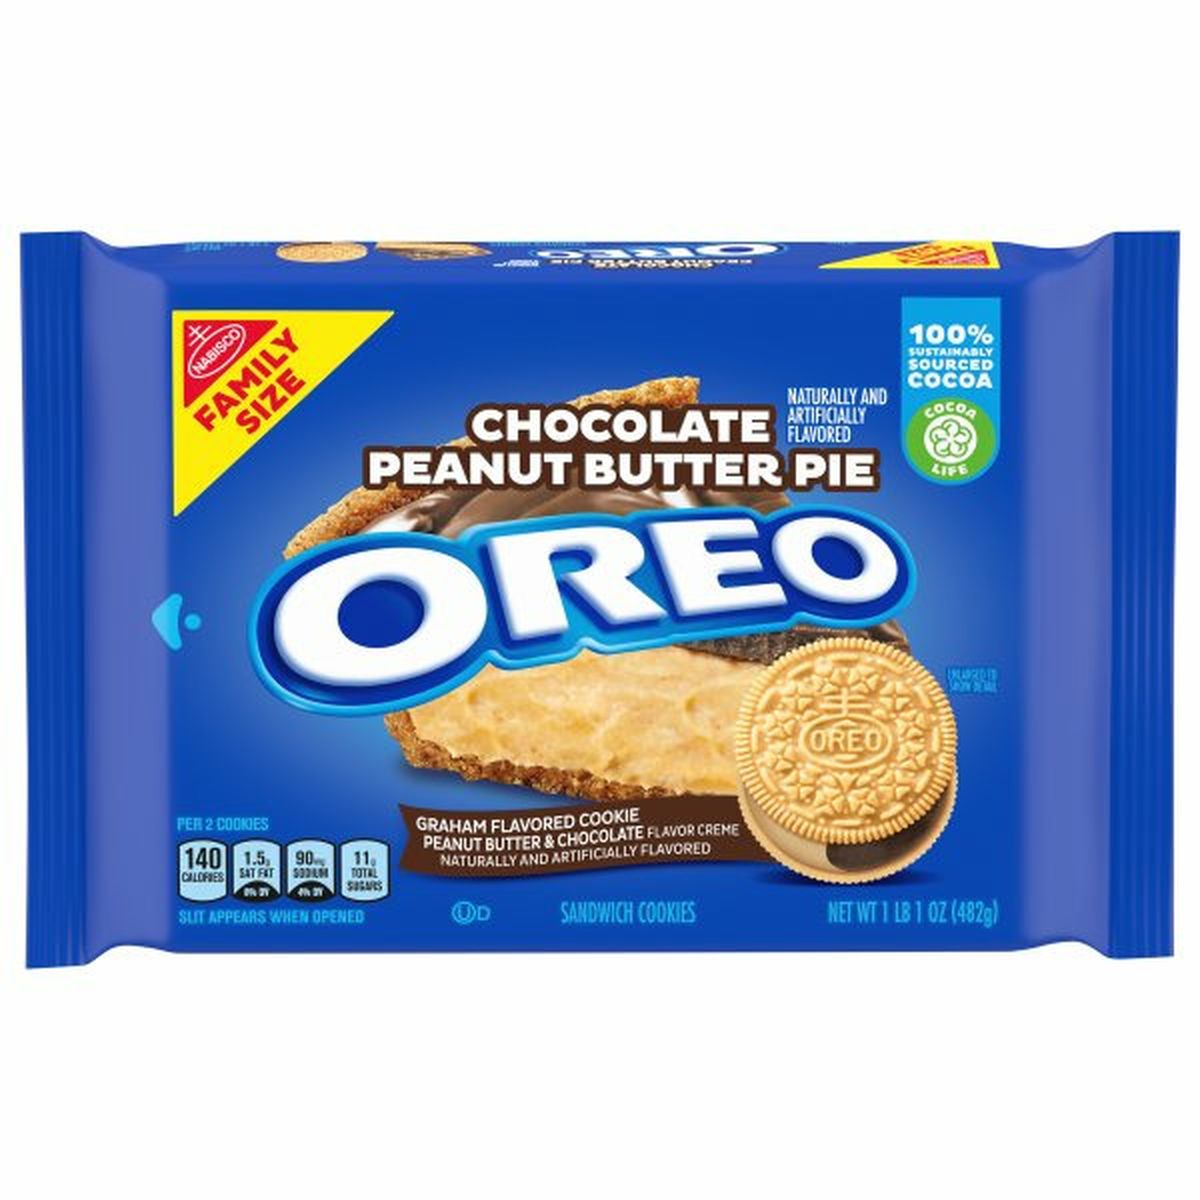 Calories in Oreo Sandwich Cookies, Chocolate Peanut Butter Pie, Family Size